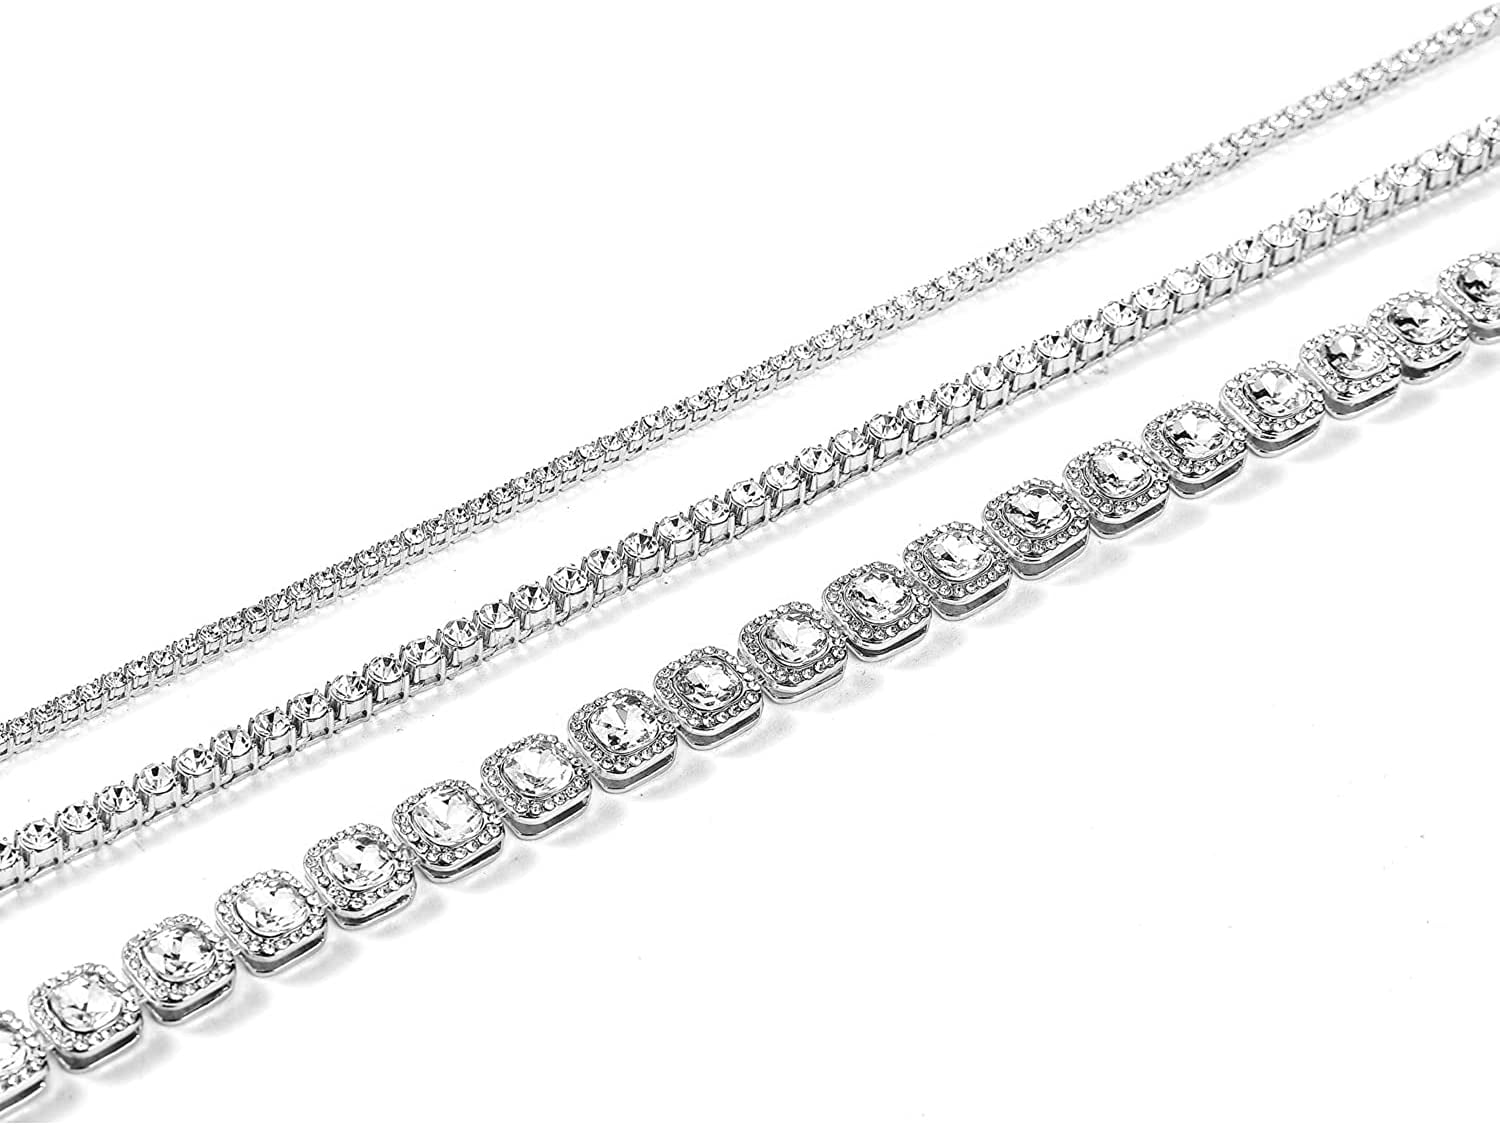 HH Bling Empire Silver Gold Iced Out Diamond Tennis Chains for  Men,Rhinestone Tennis Necklaces for Women,Diamond chain necklaces (4mm